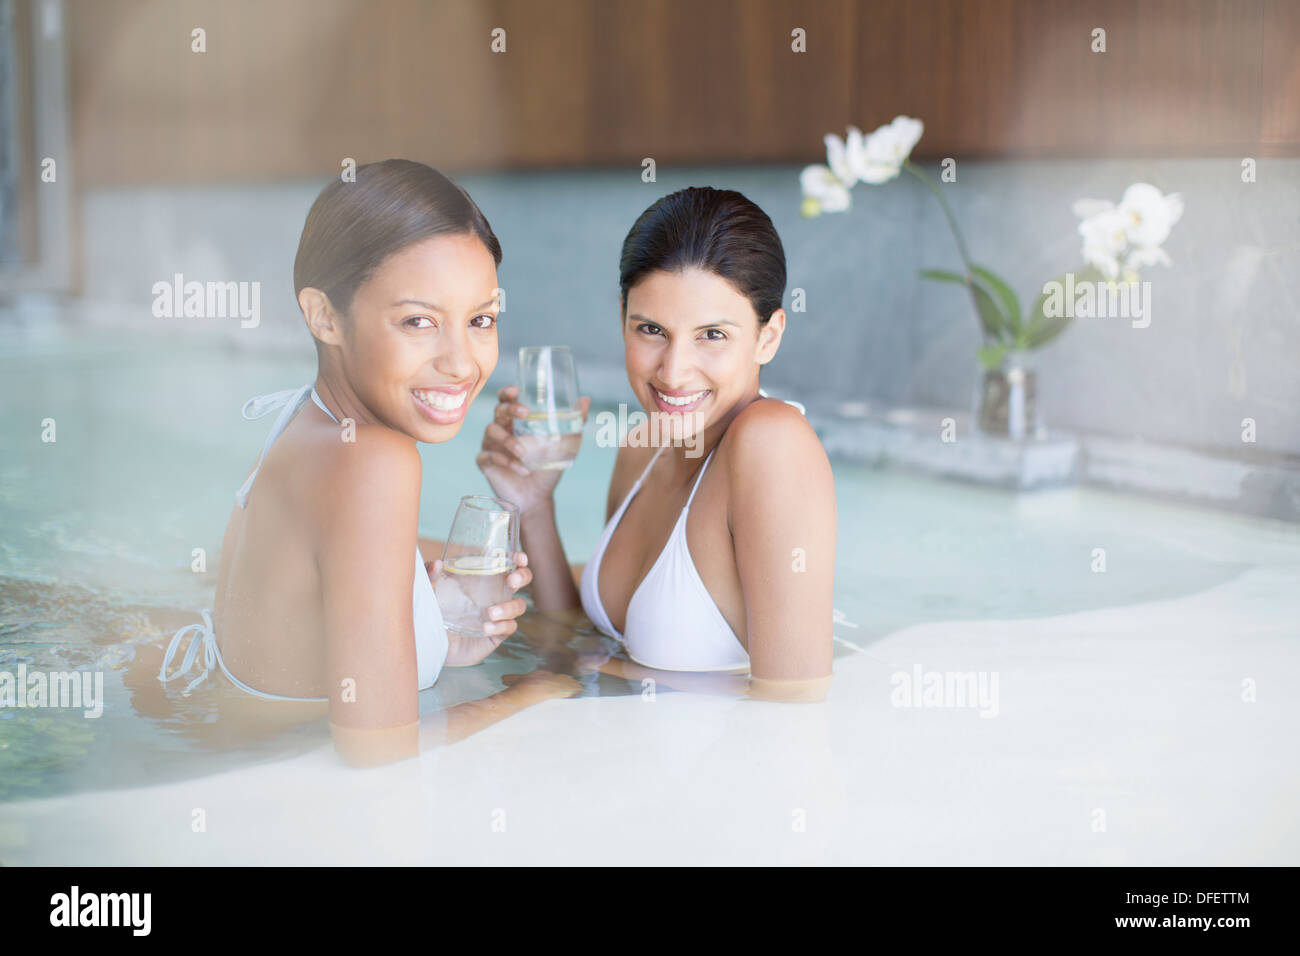 Portrait of smiling women in swimming pool at spa Banque D'Images